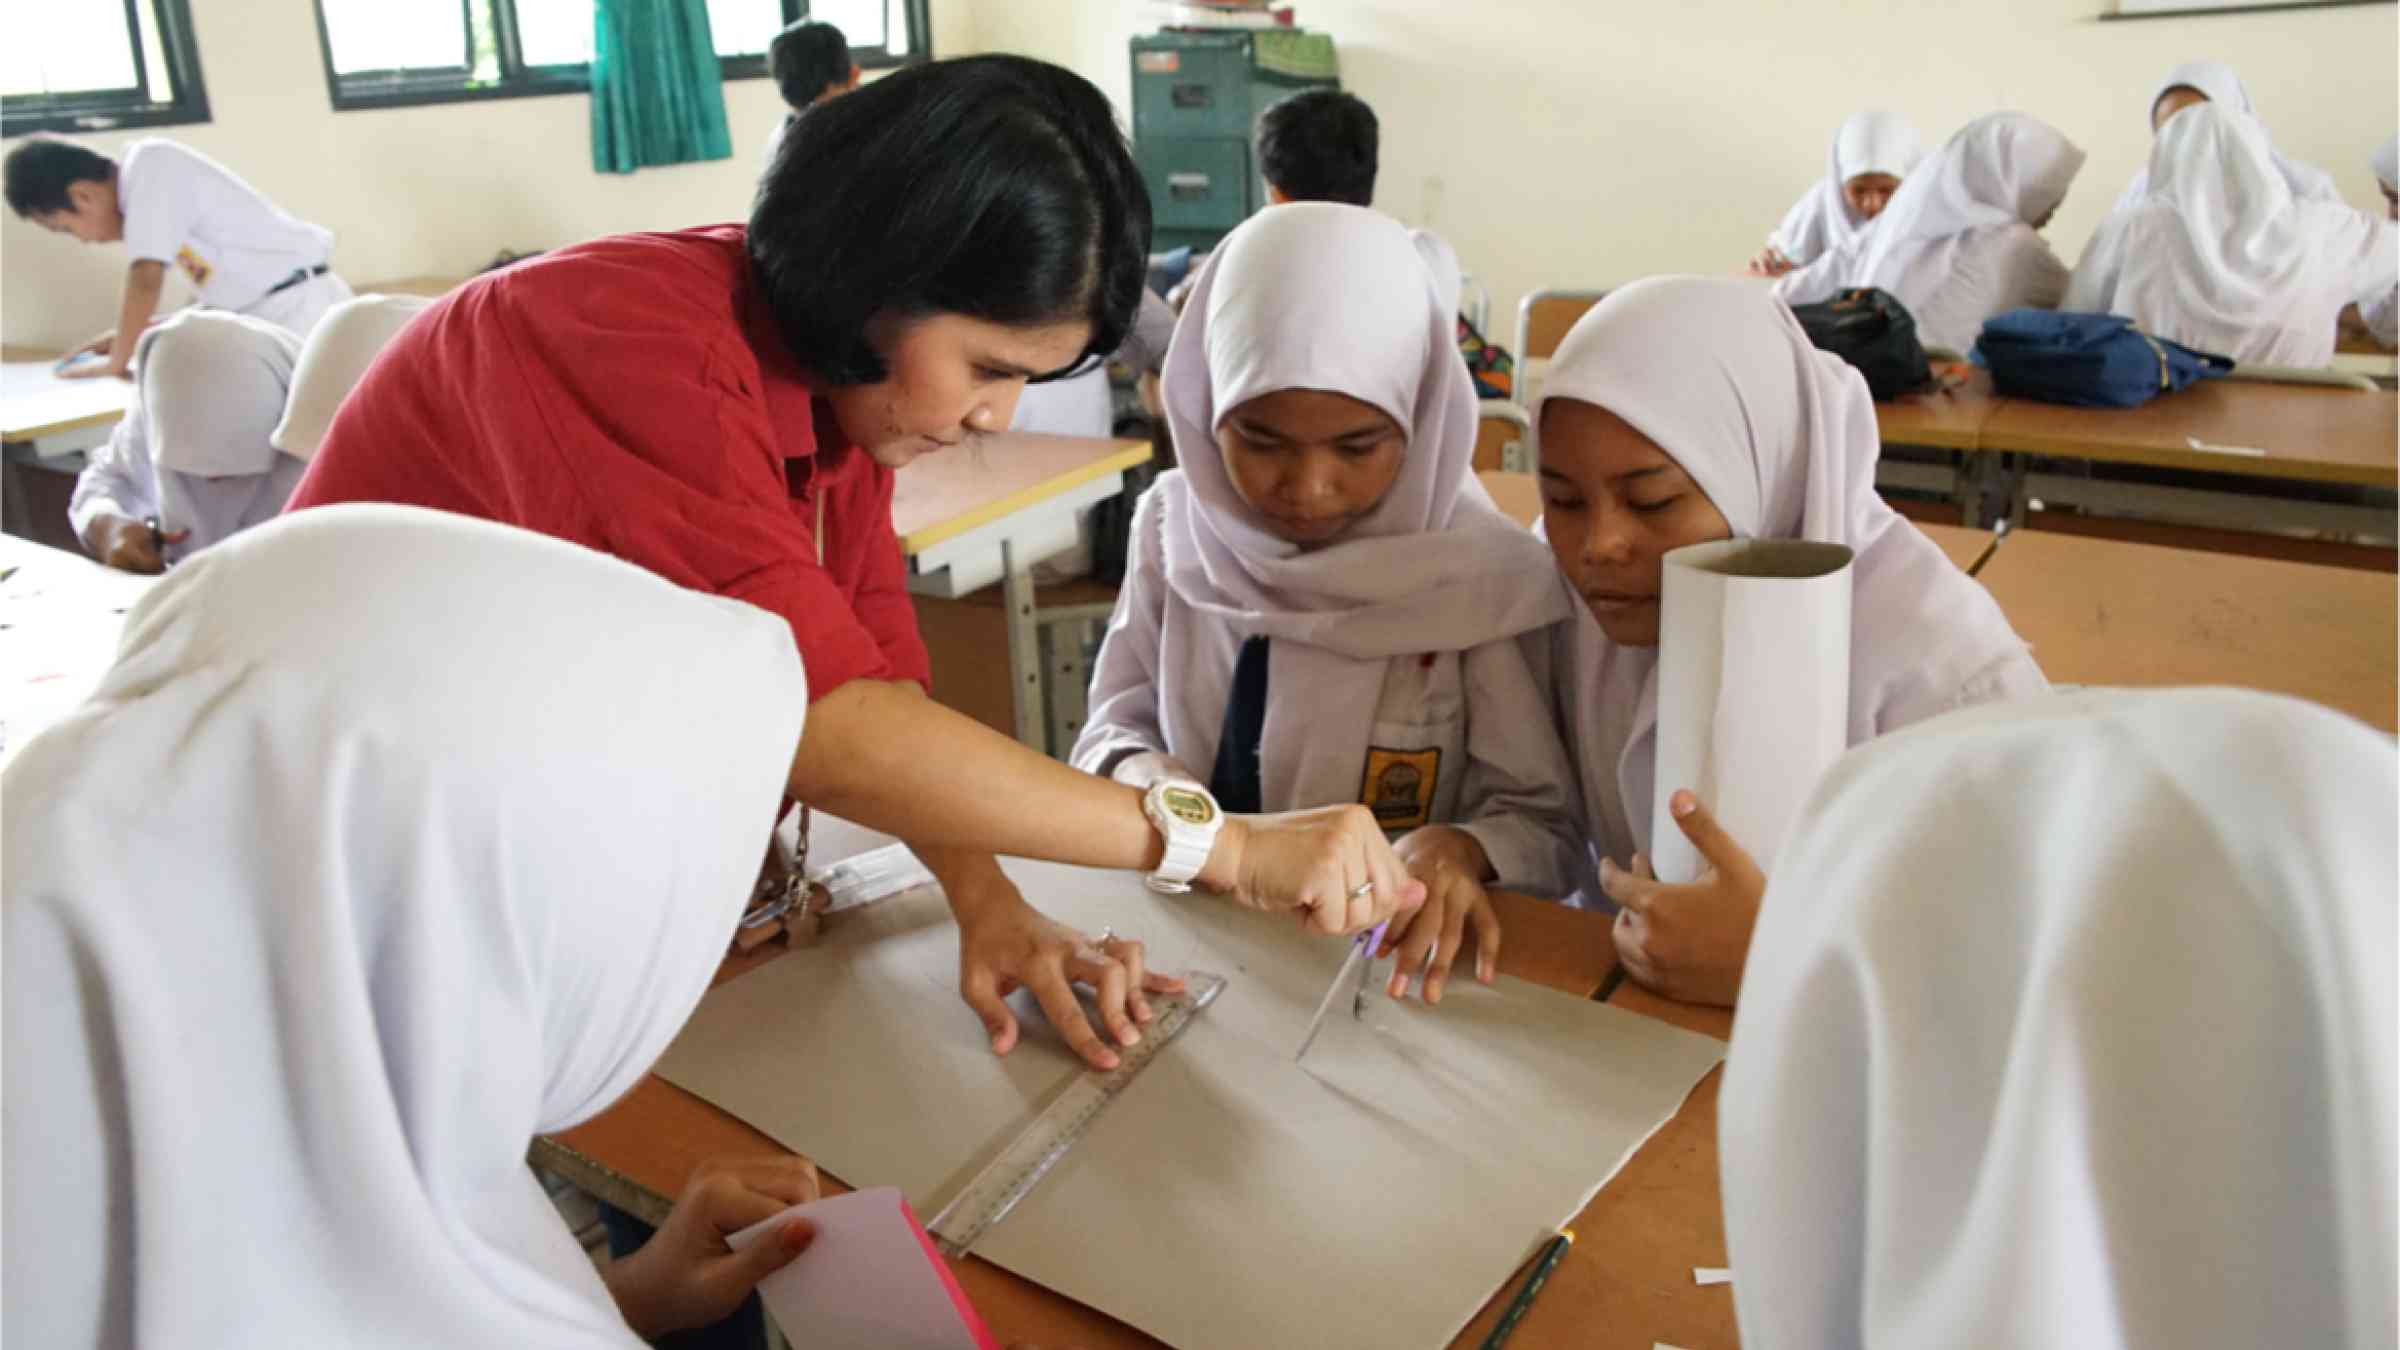 A teacher guides students in a class project